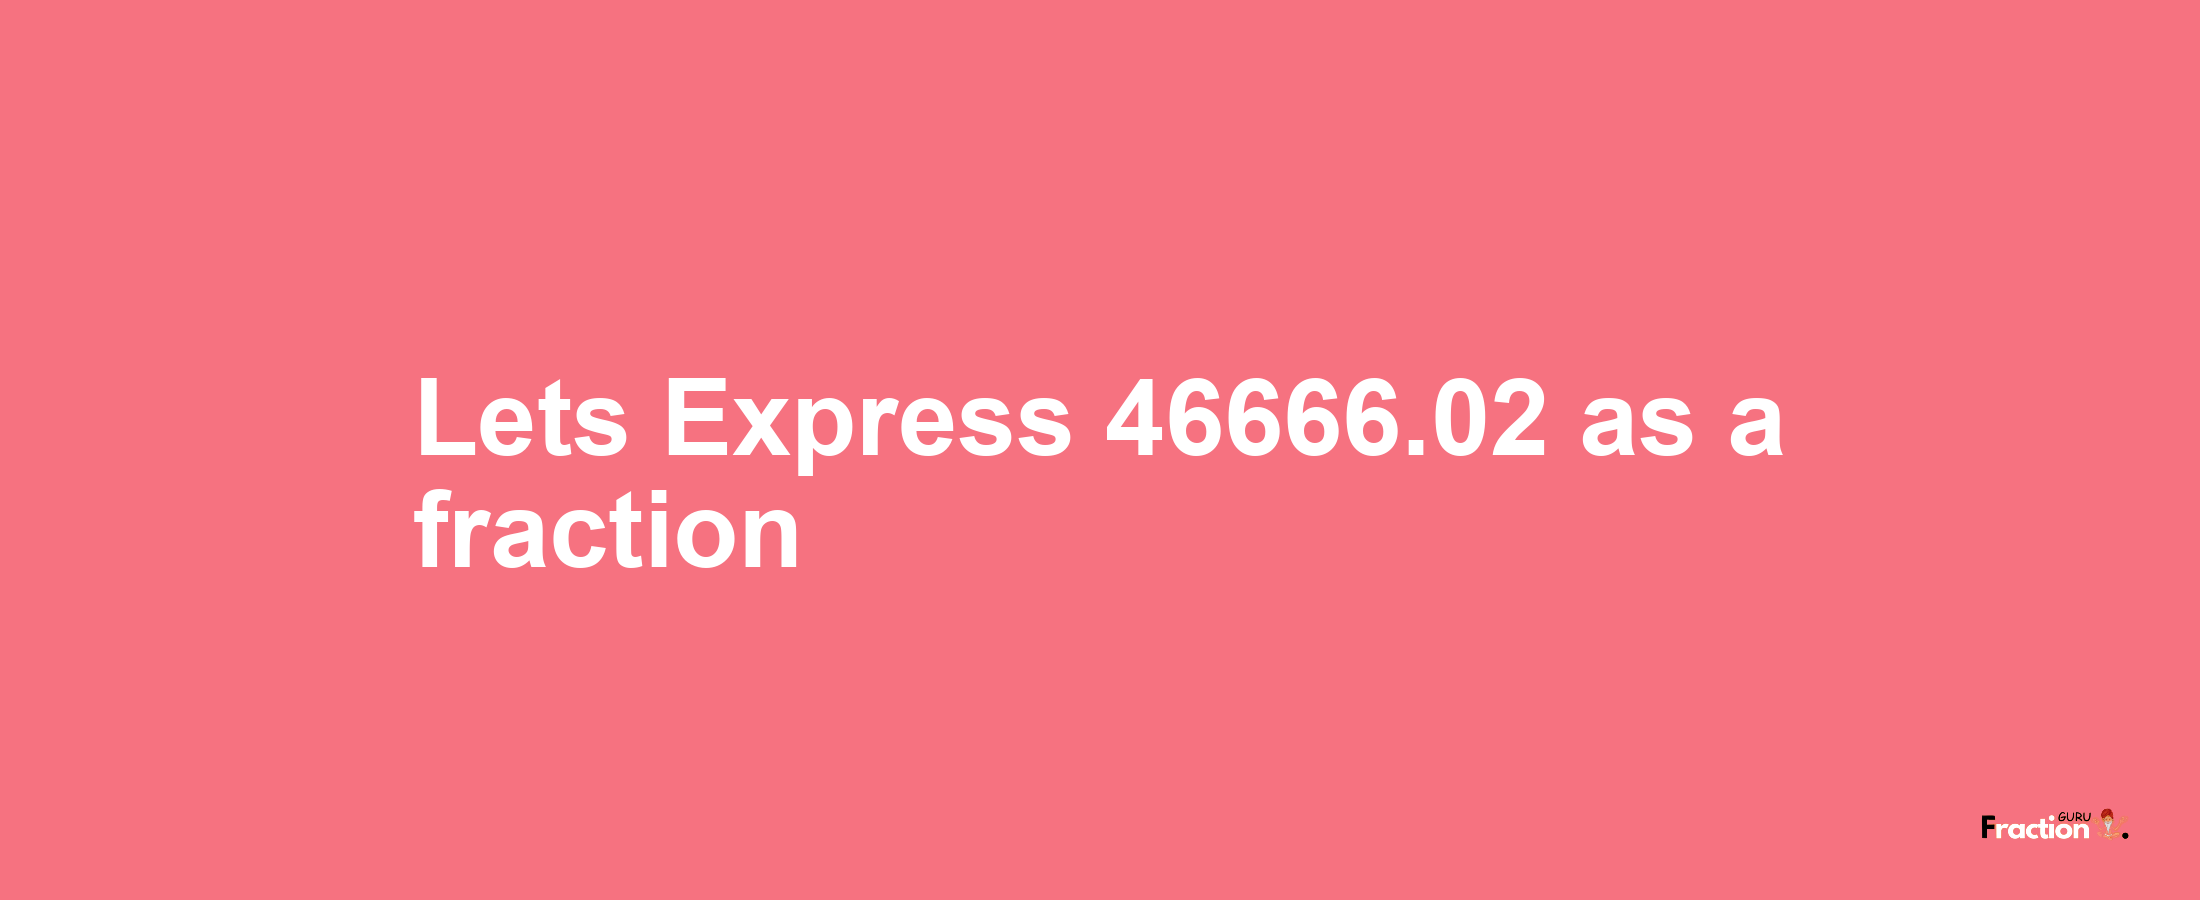 Lets Express 46666.02 as afraction